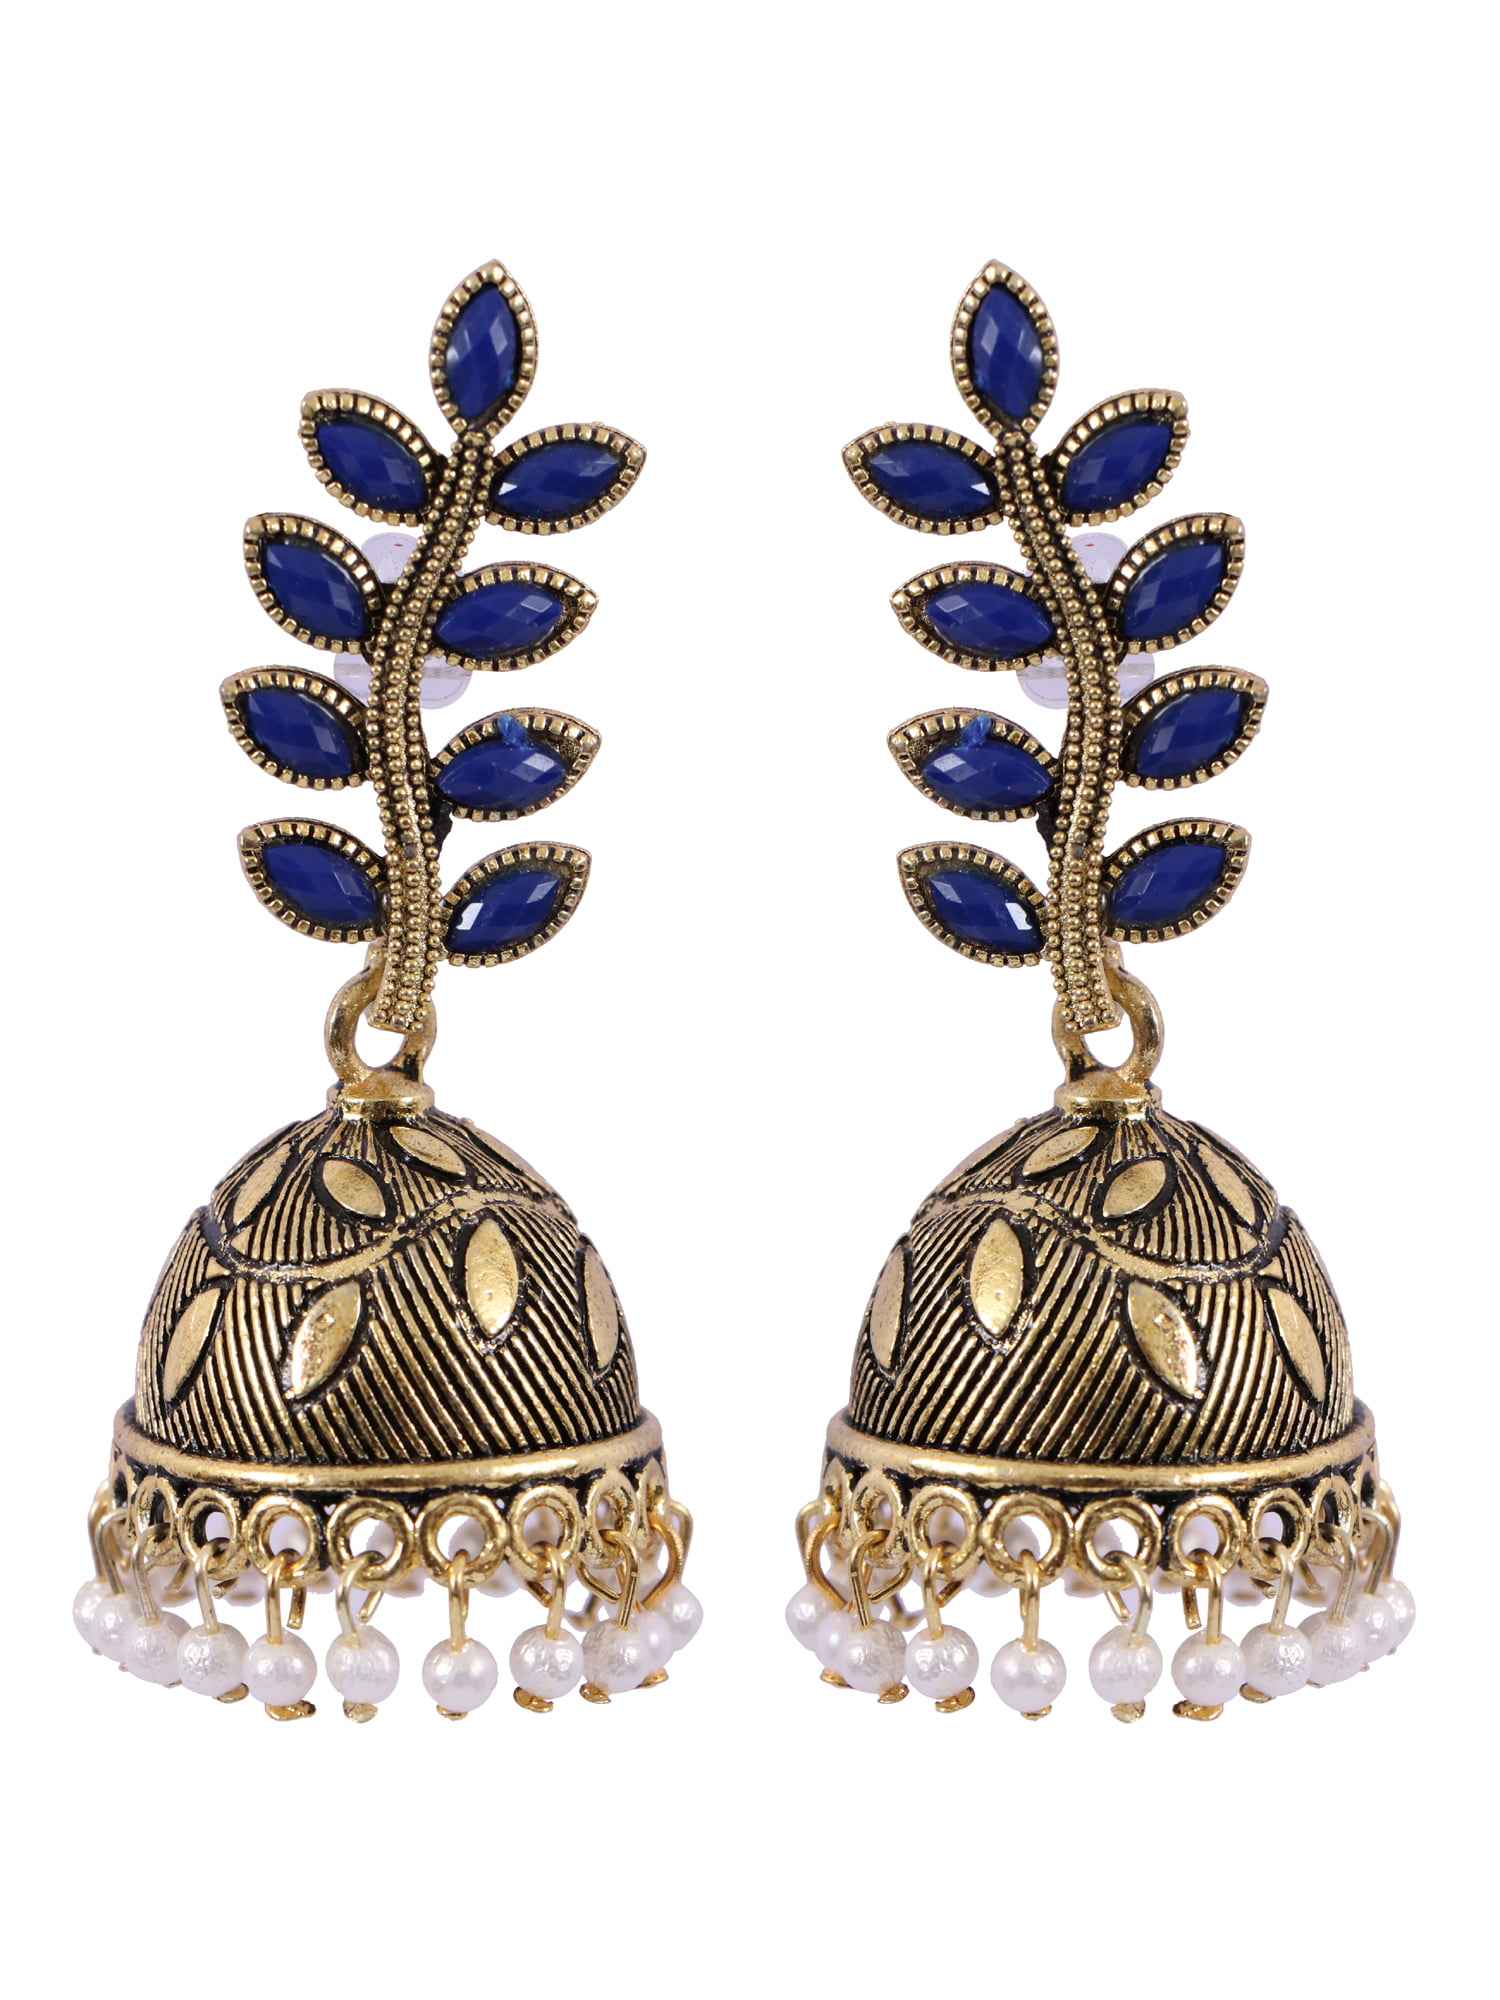 Amazon.com: Crunchy Fashion Tribal Muse Collection Oxidized Gold Plated  Stylish Indian Wedding Jewelry Black Jhumki Jhumka Earrings for Women:  Clothing, Shoes & Jewelry